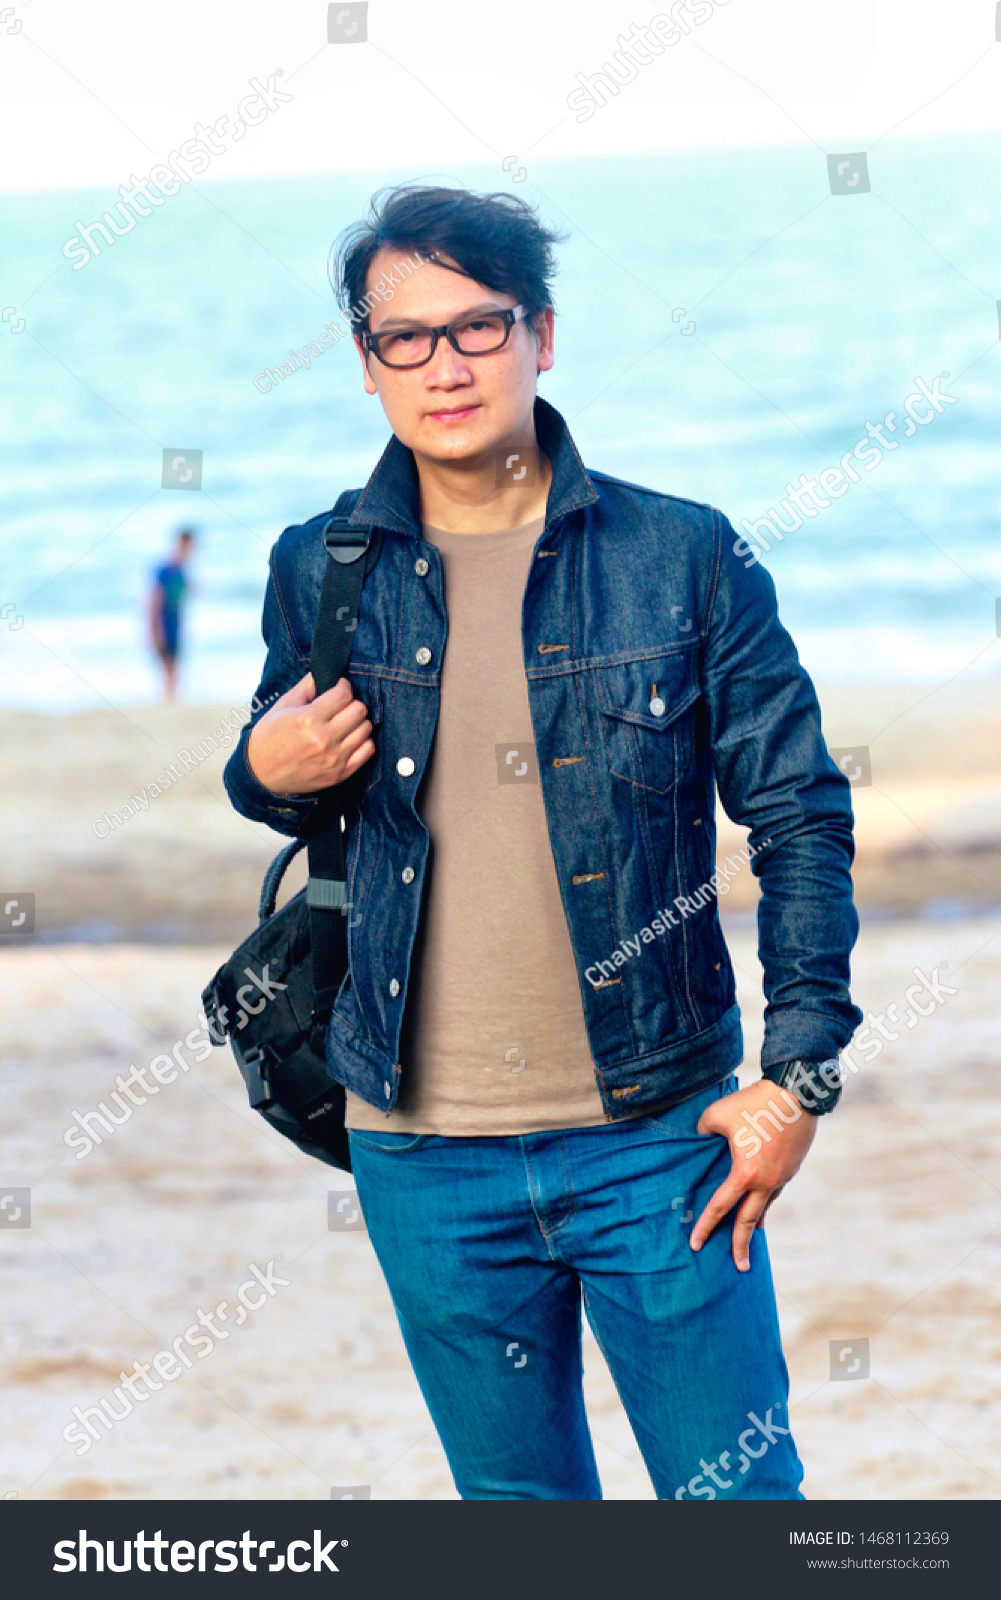 A young man wearing glasses wearing a denim jacket #1468112369